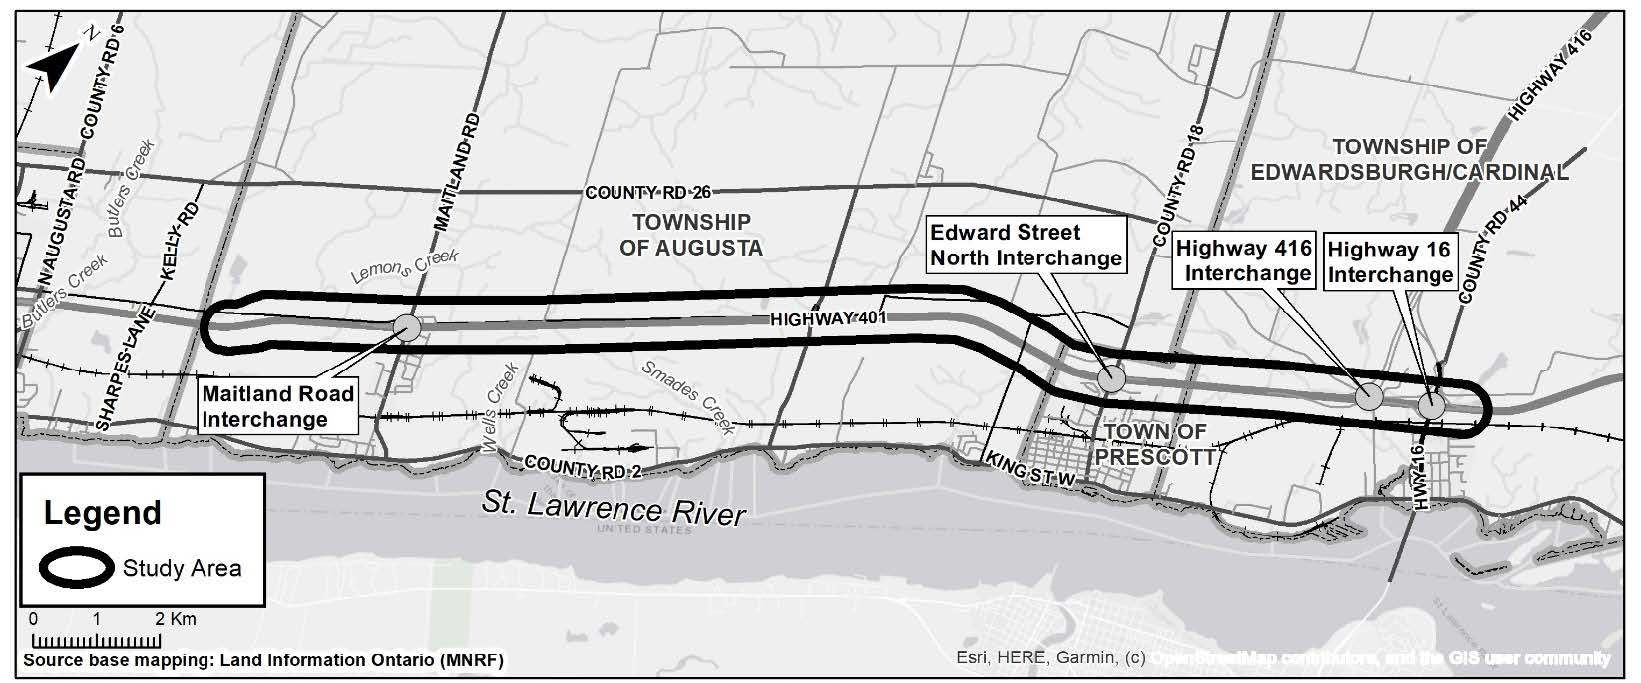 Map of area for preliminary assessment of Hwy 401